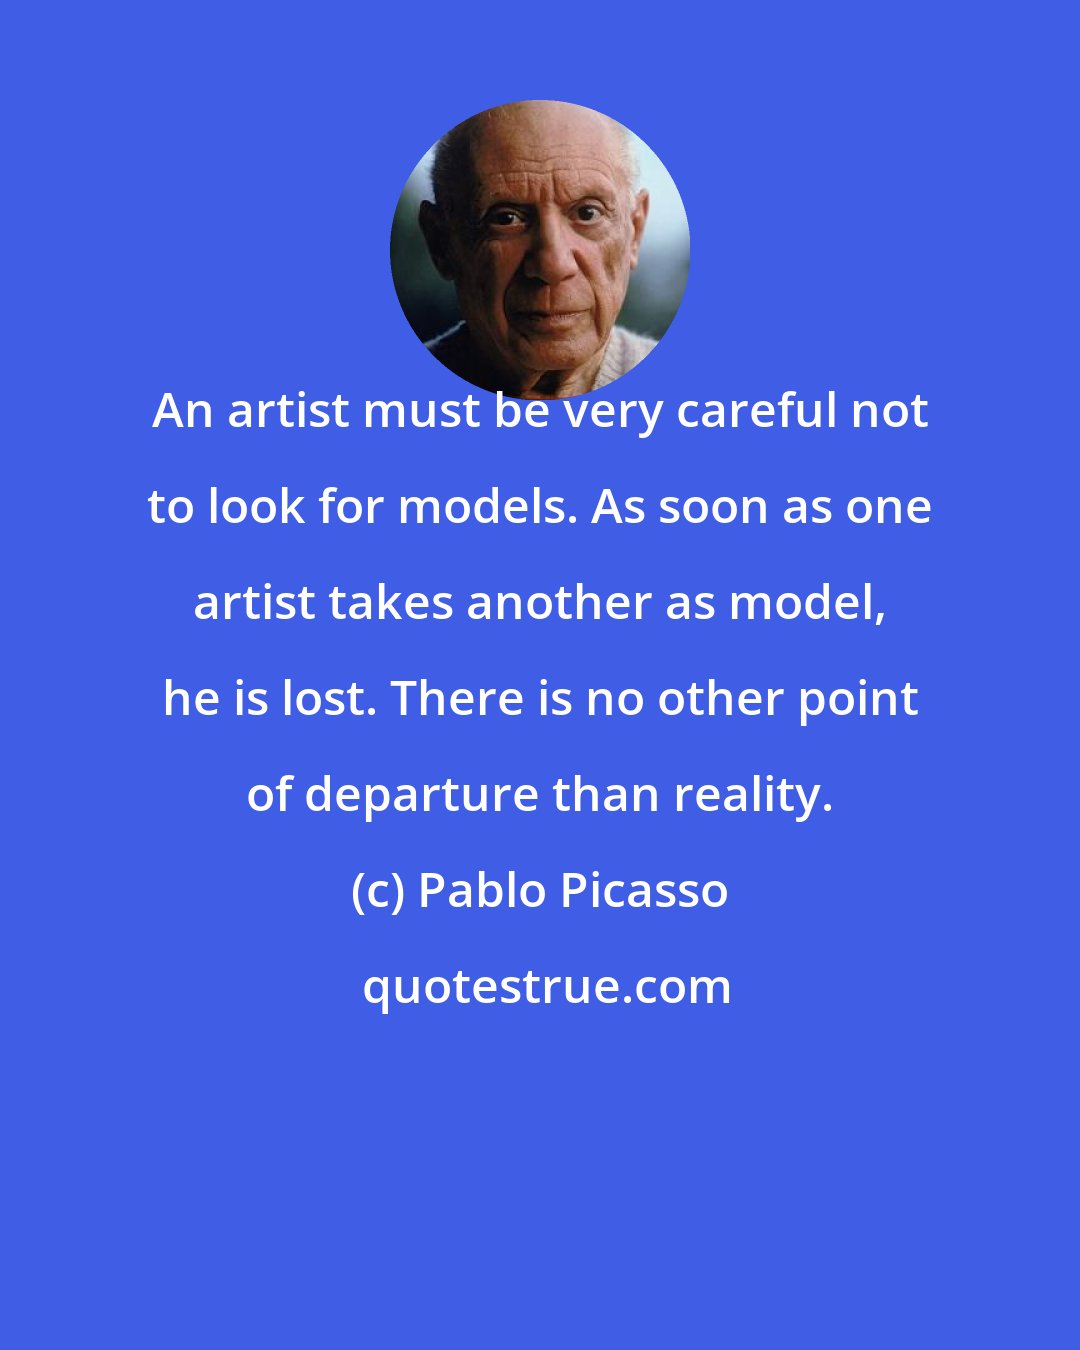 Pablo Picasso: An artist must be very careful not to look for models. As soon as one artist takes another as model, he is lost. There is no other point of departure than reality.